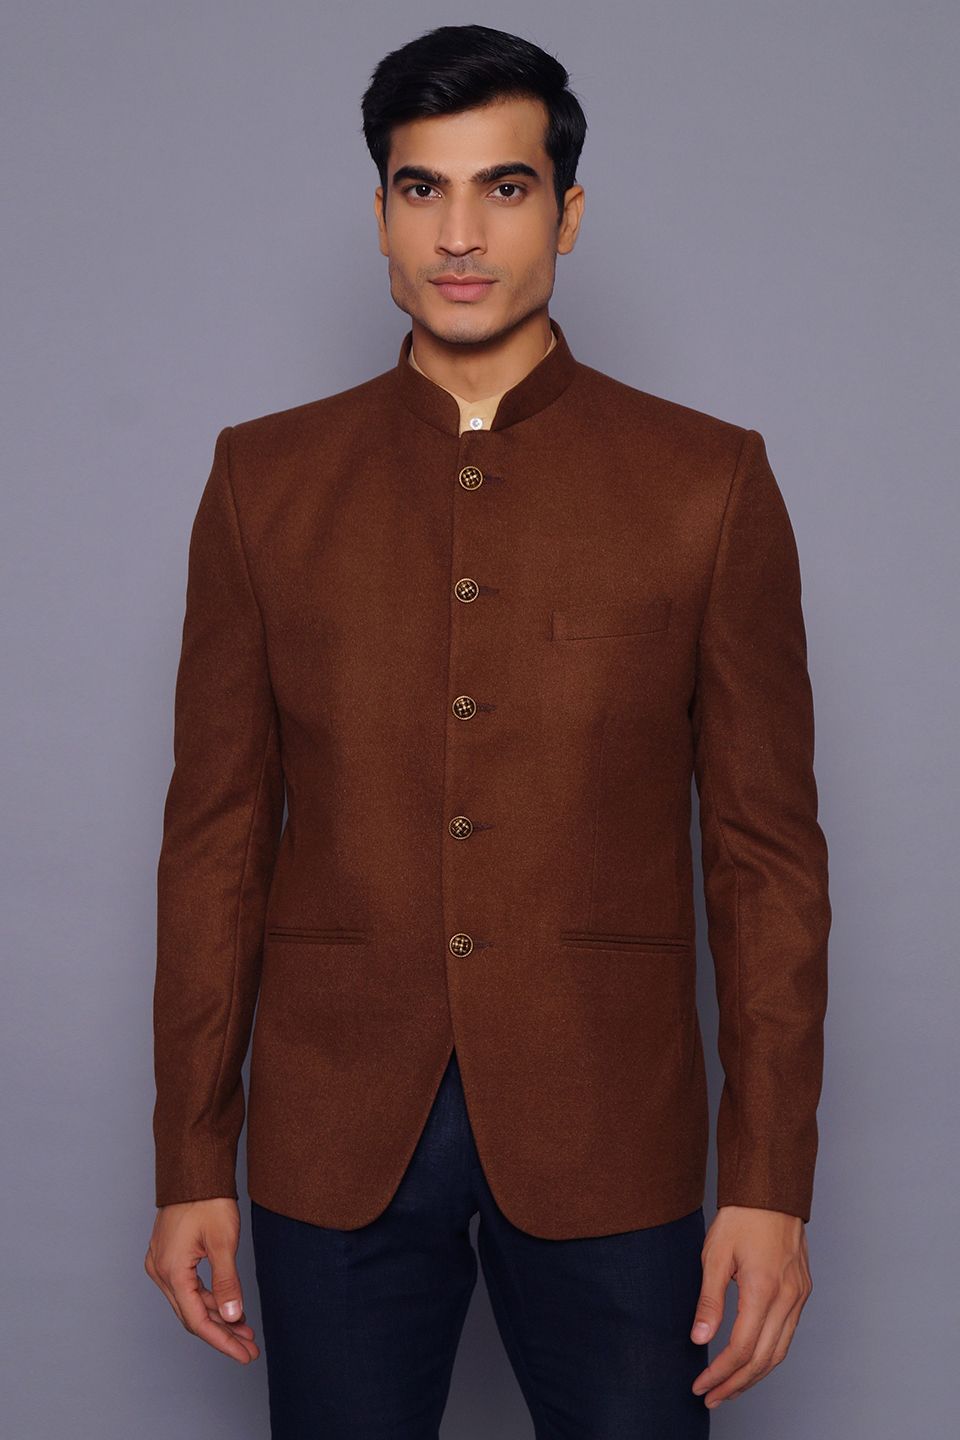 Wintage Men's Wool Casual and Festive Bandhgala Blazer : Brown 1